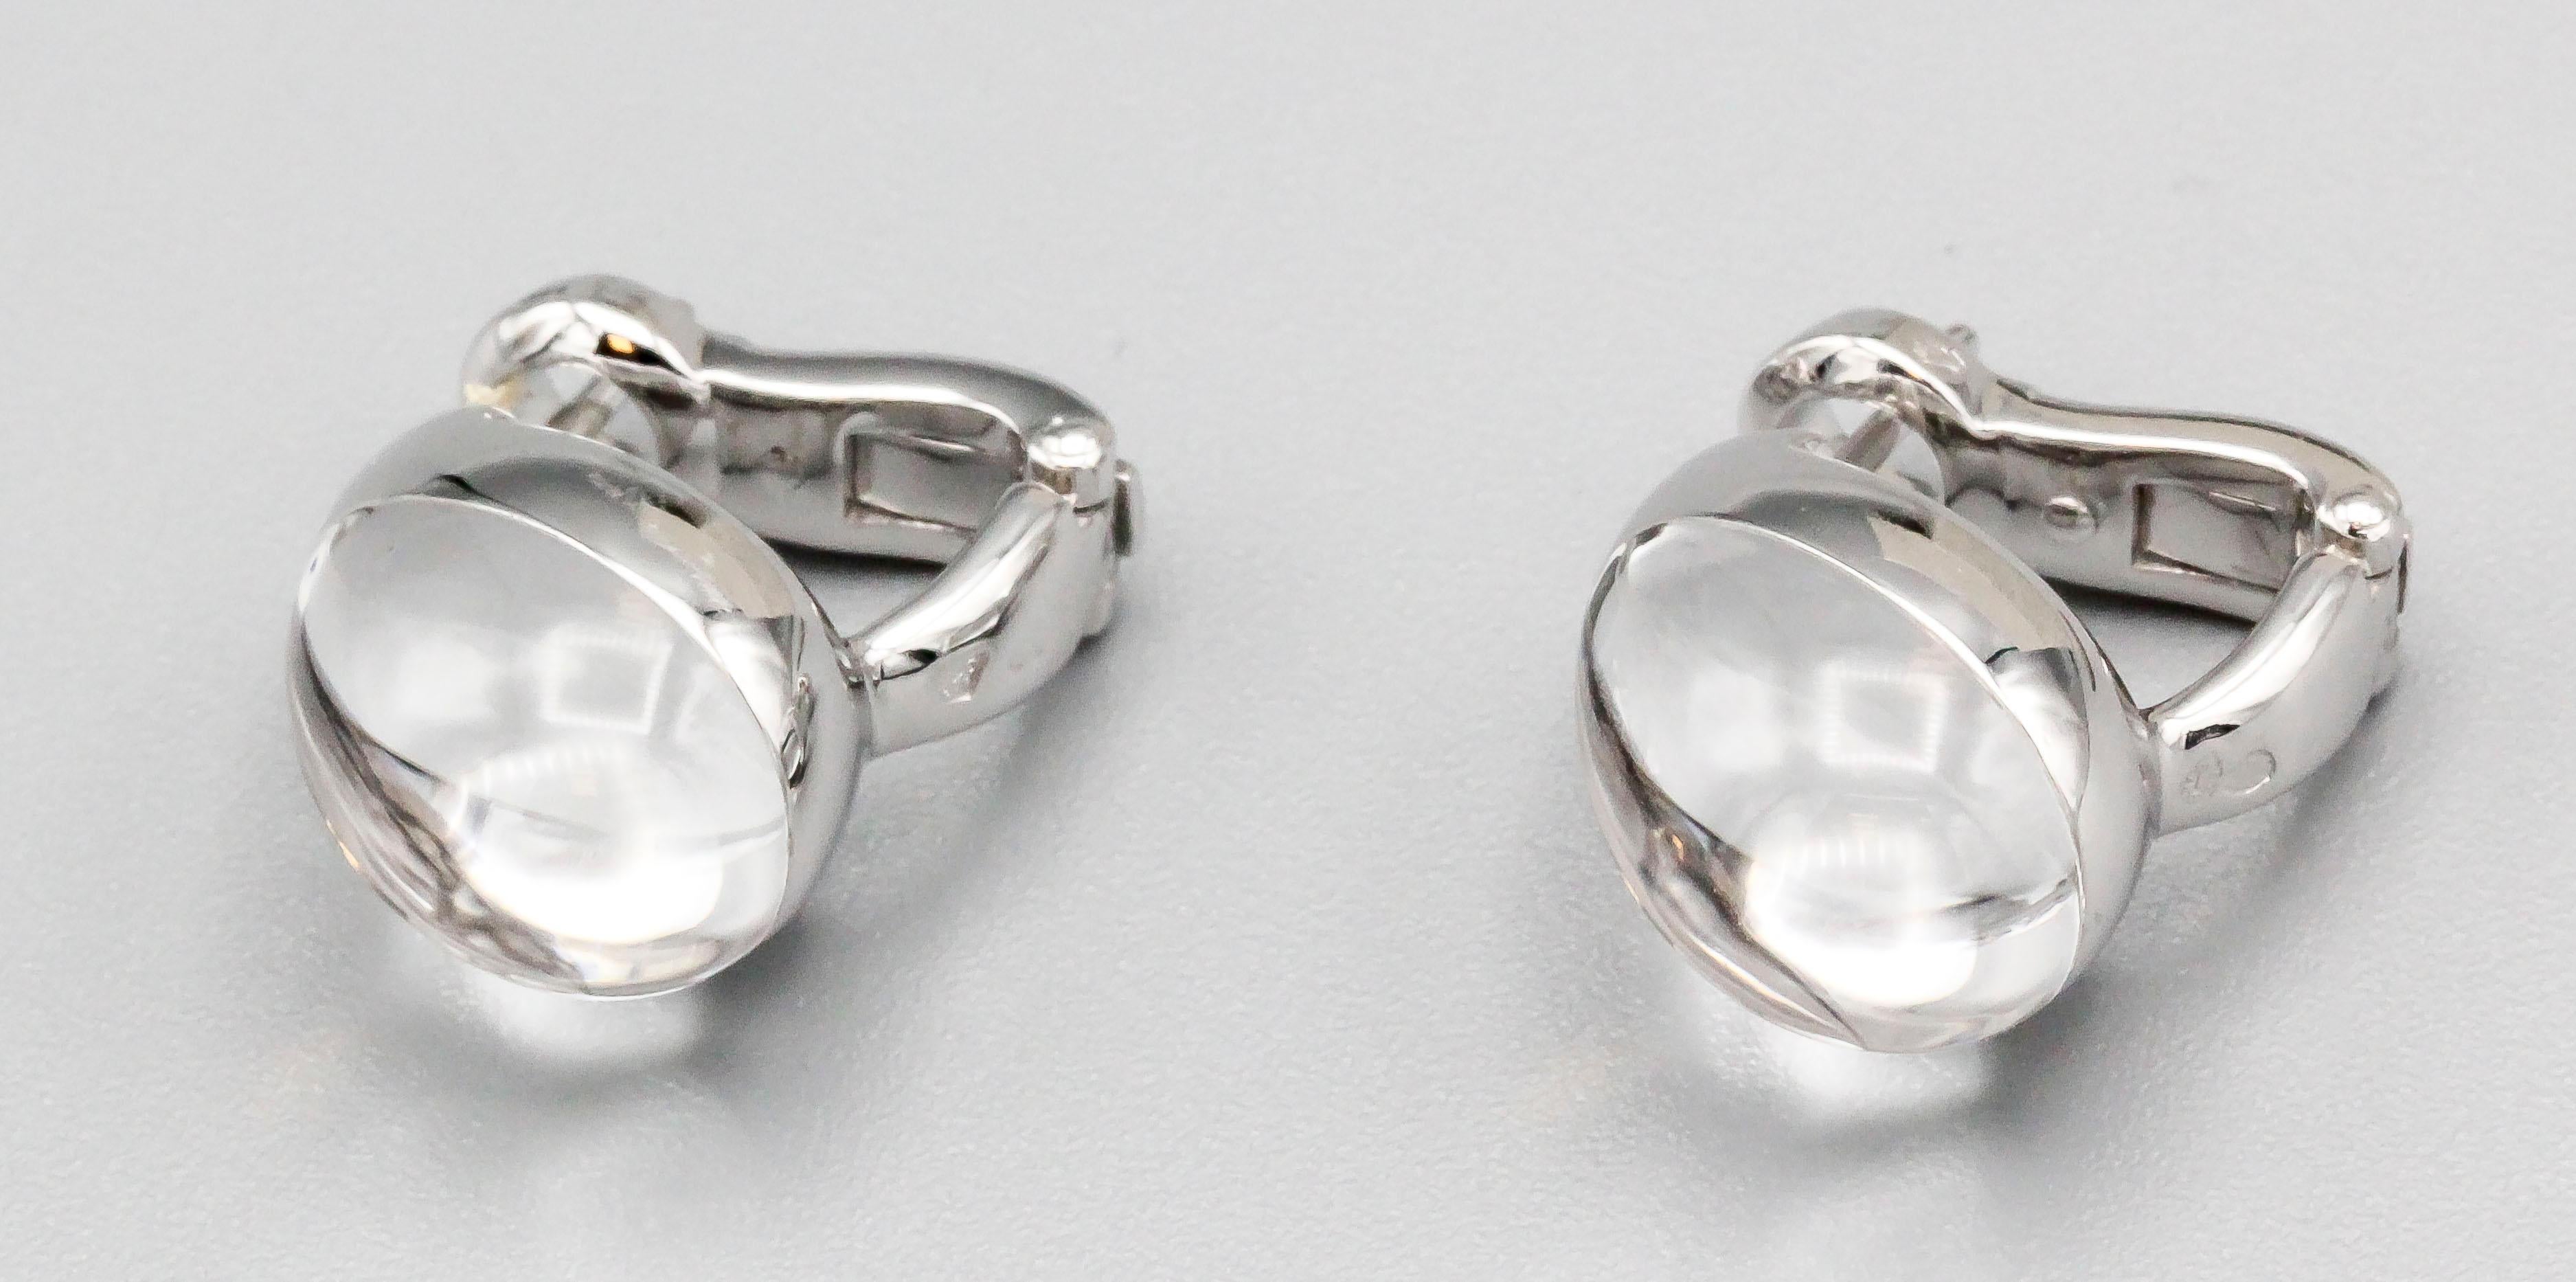 Whimsical diamond, rock crystal and 18K white gold earrings from the 